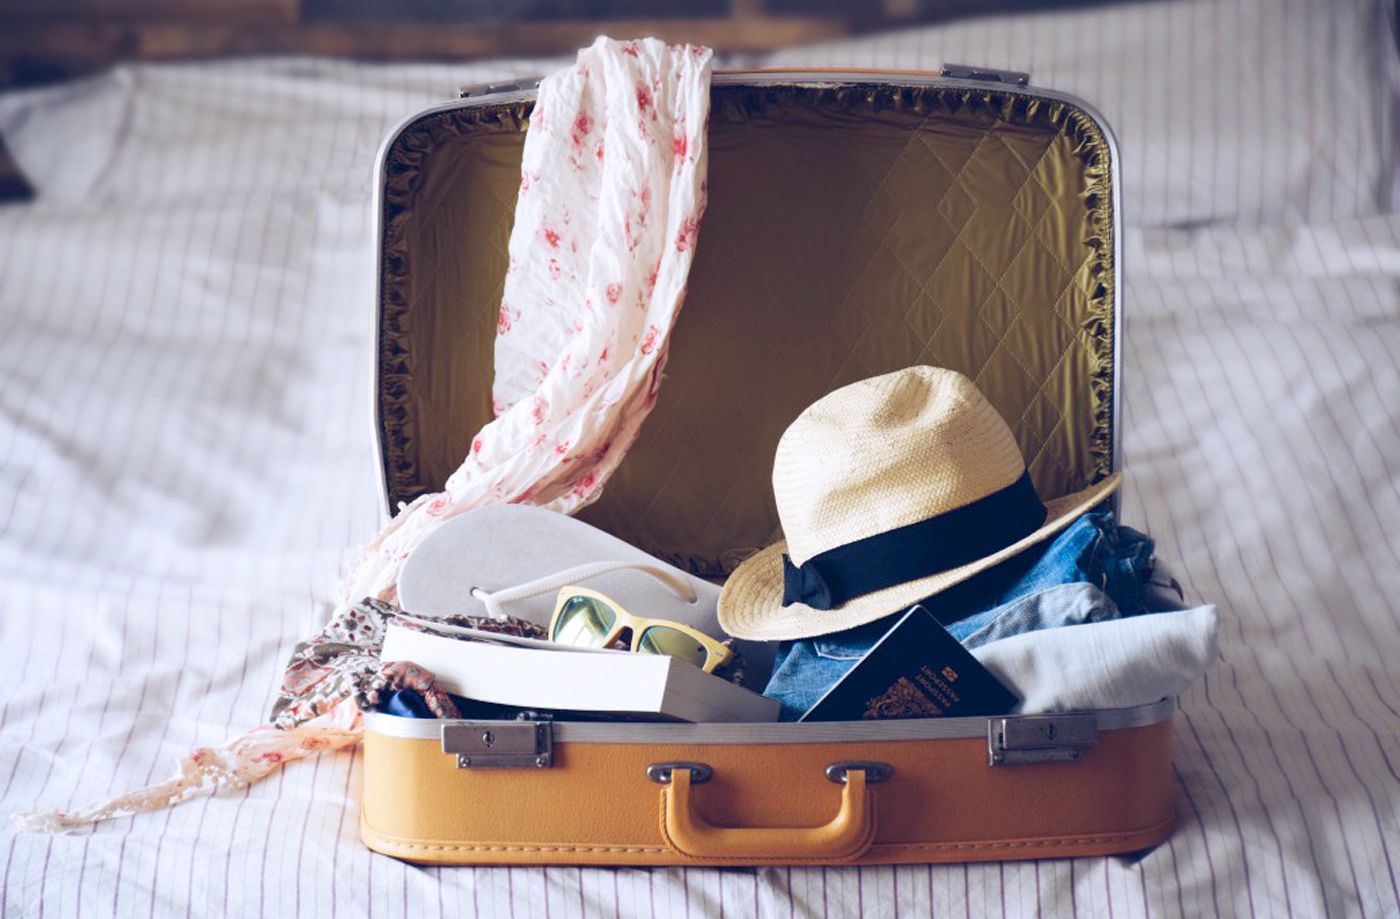 How to keep your dirty clothes smelling fresh while traveling